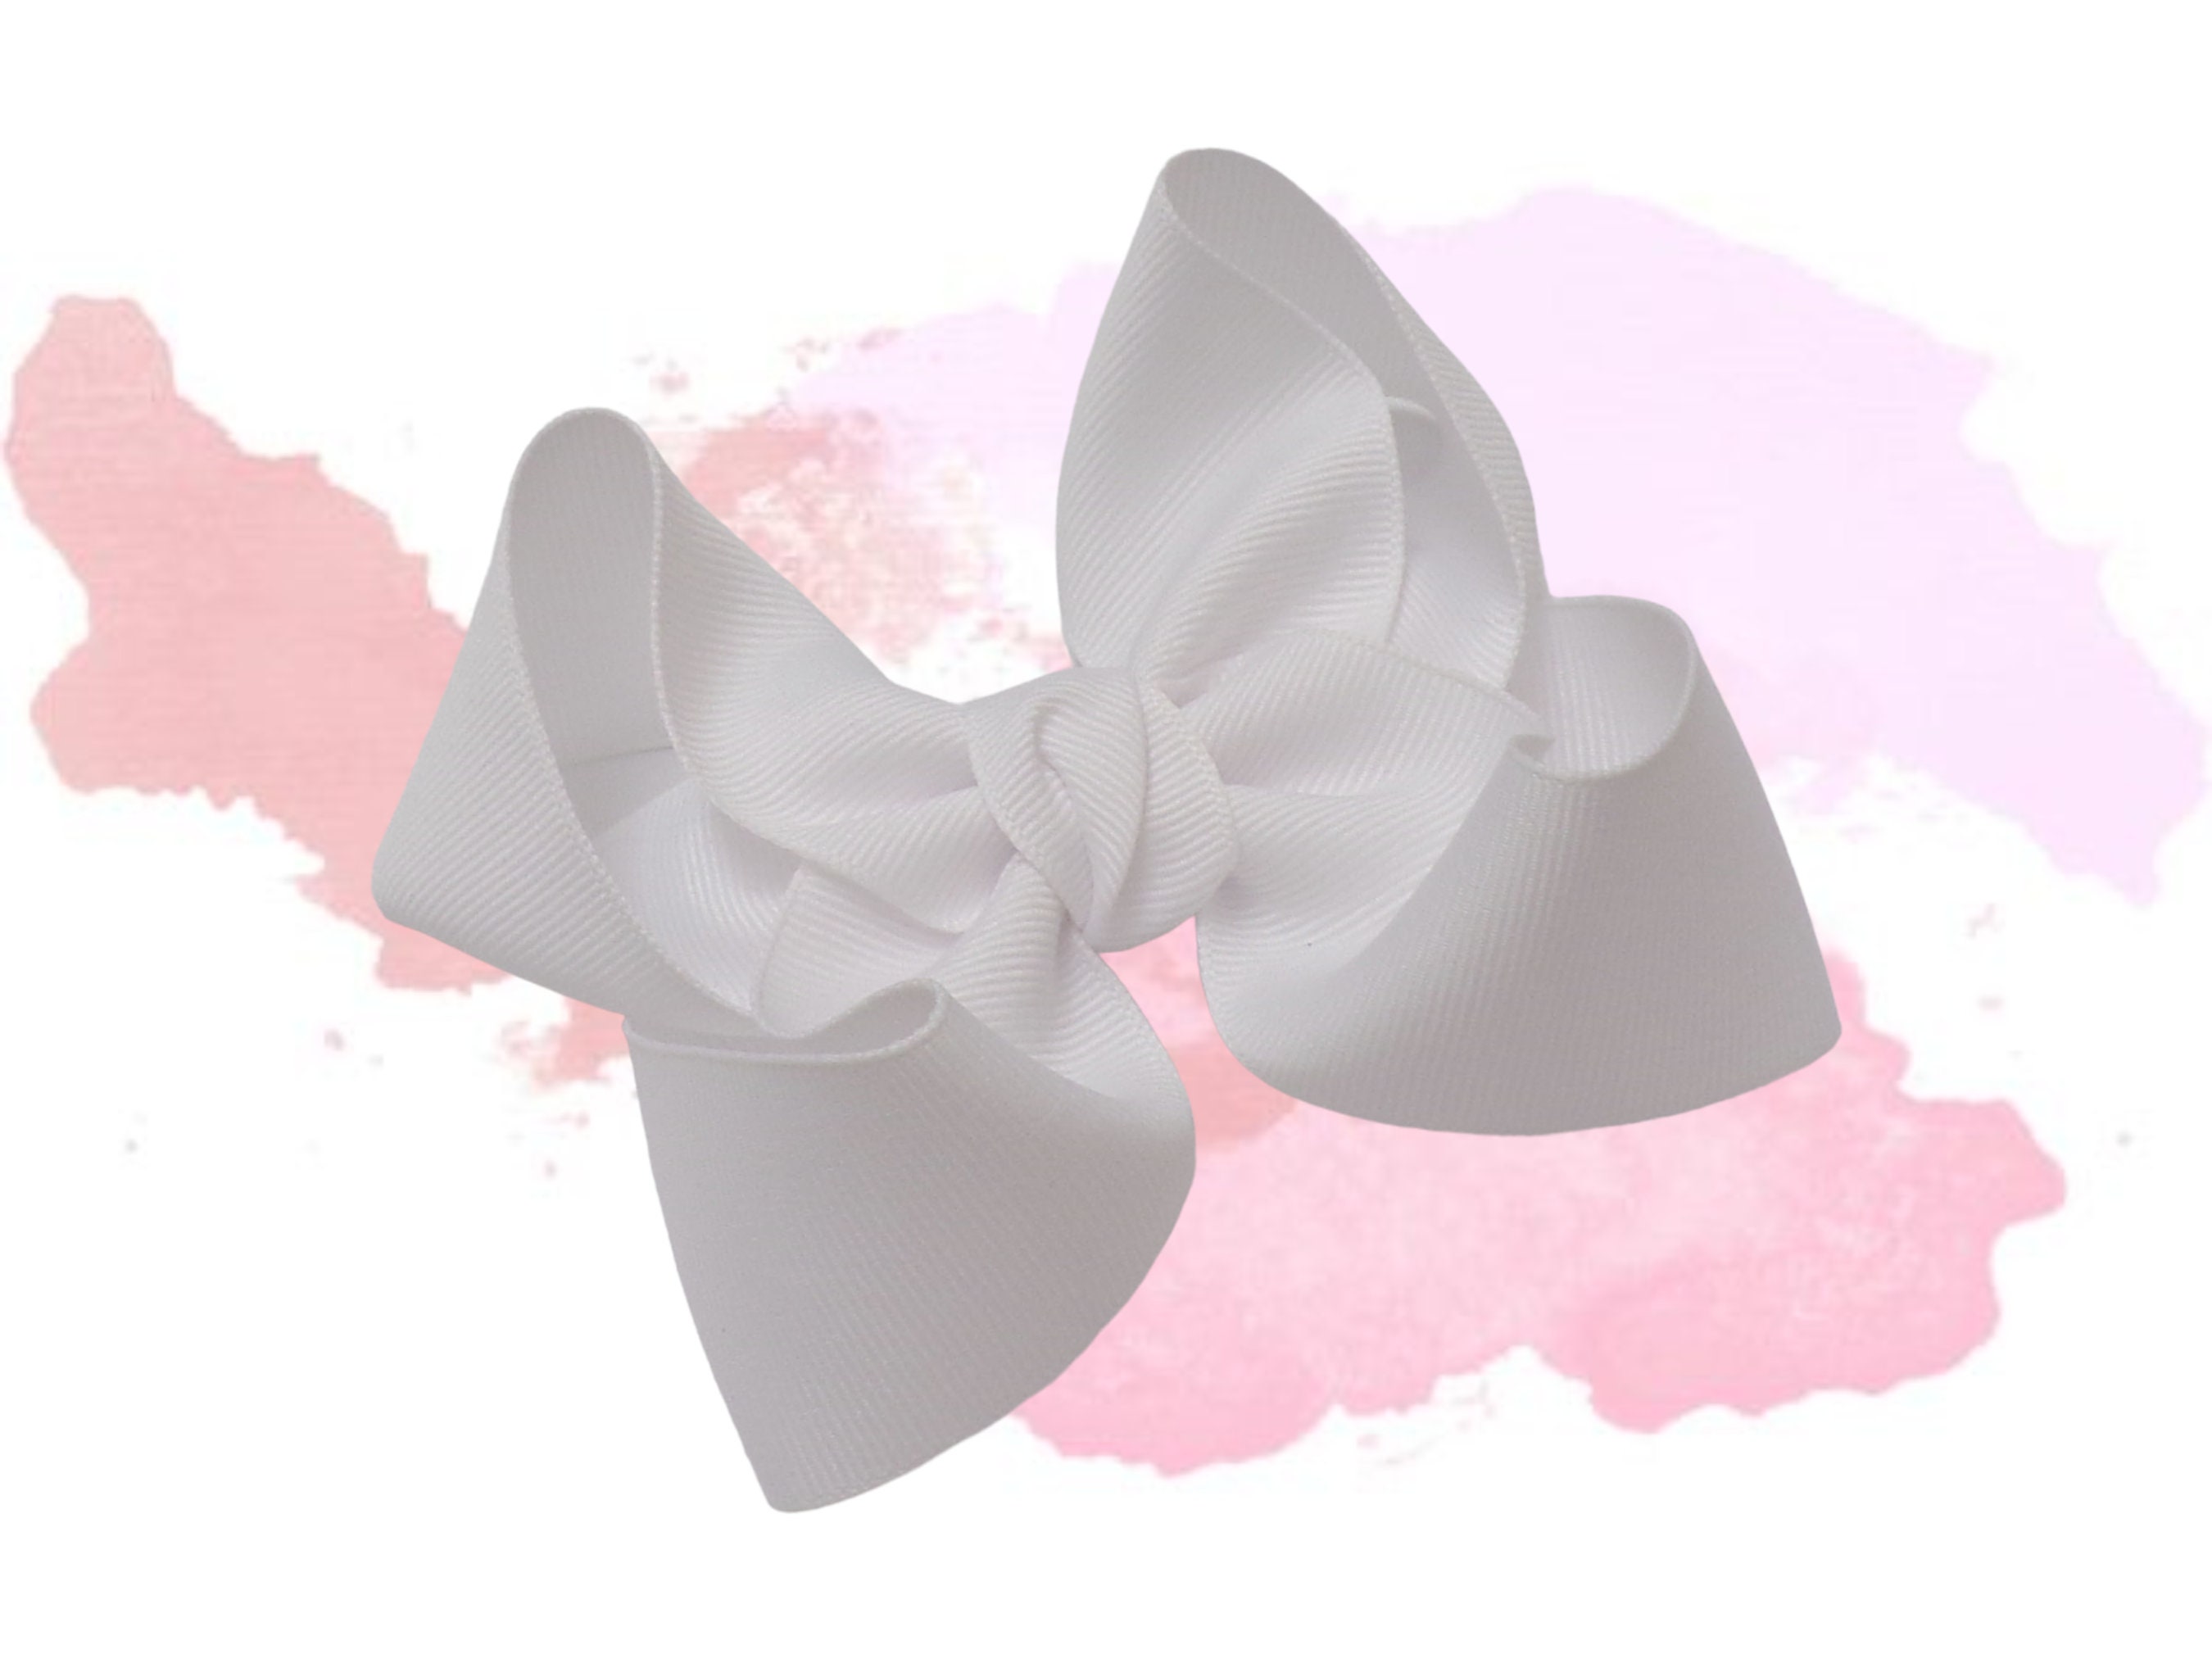 Ribbons, Bows & Barrettes To Give Your Hair A Touch Of Flair